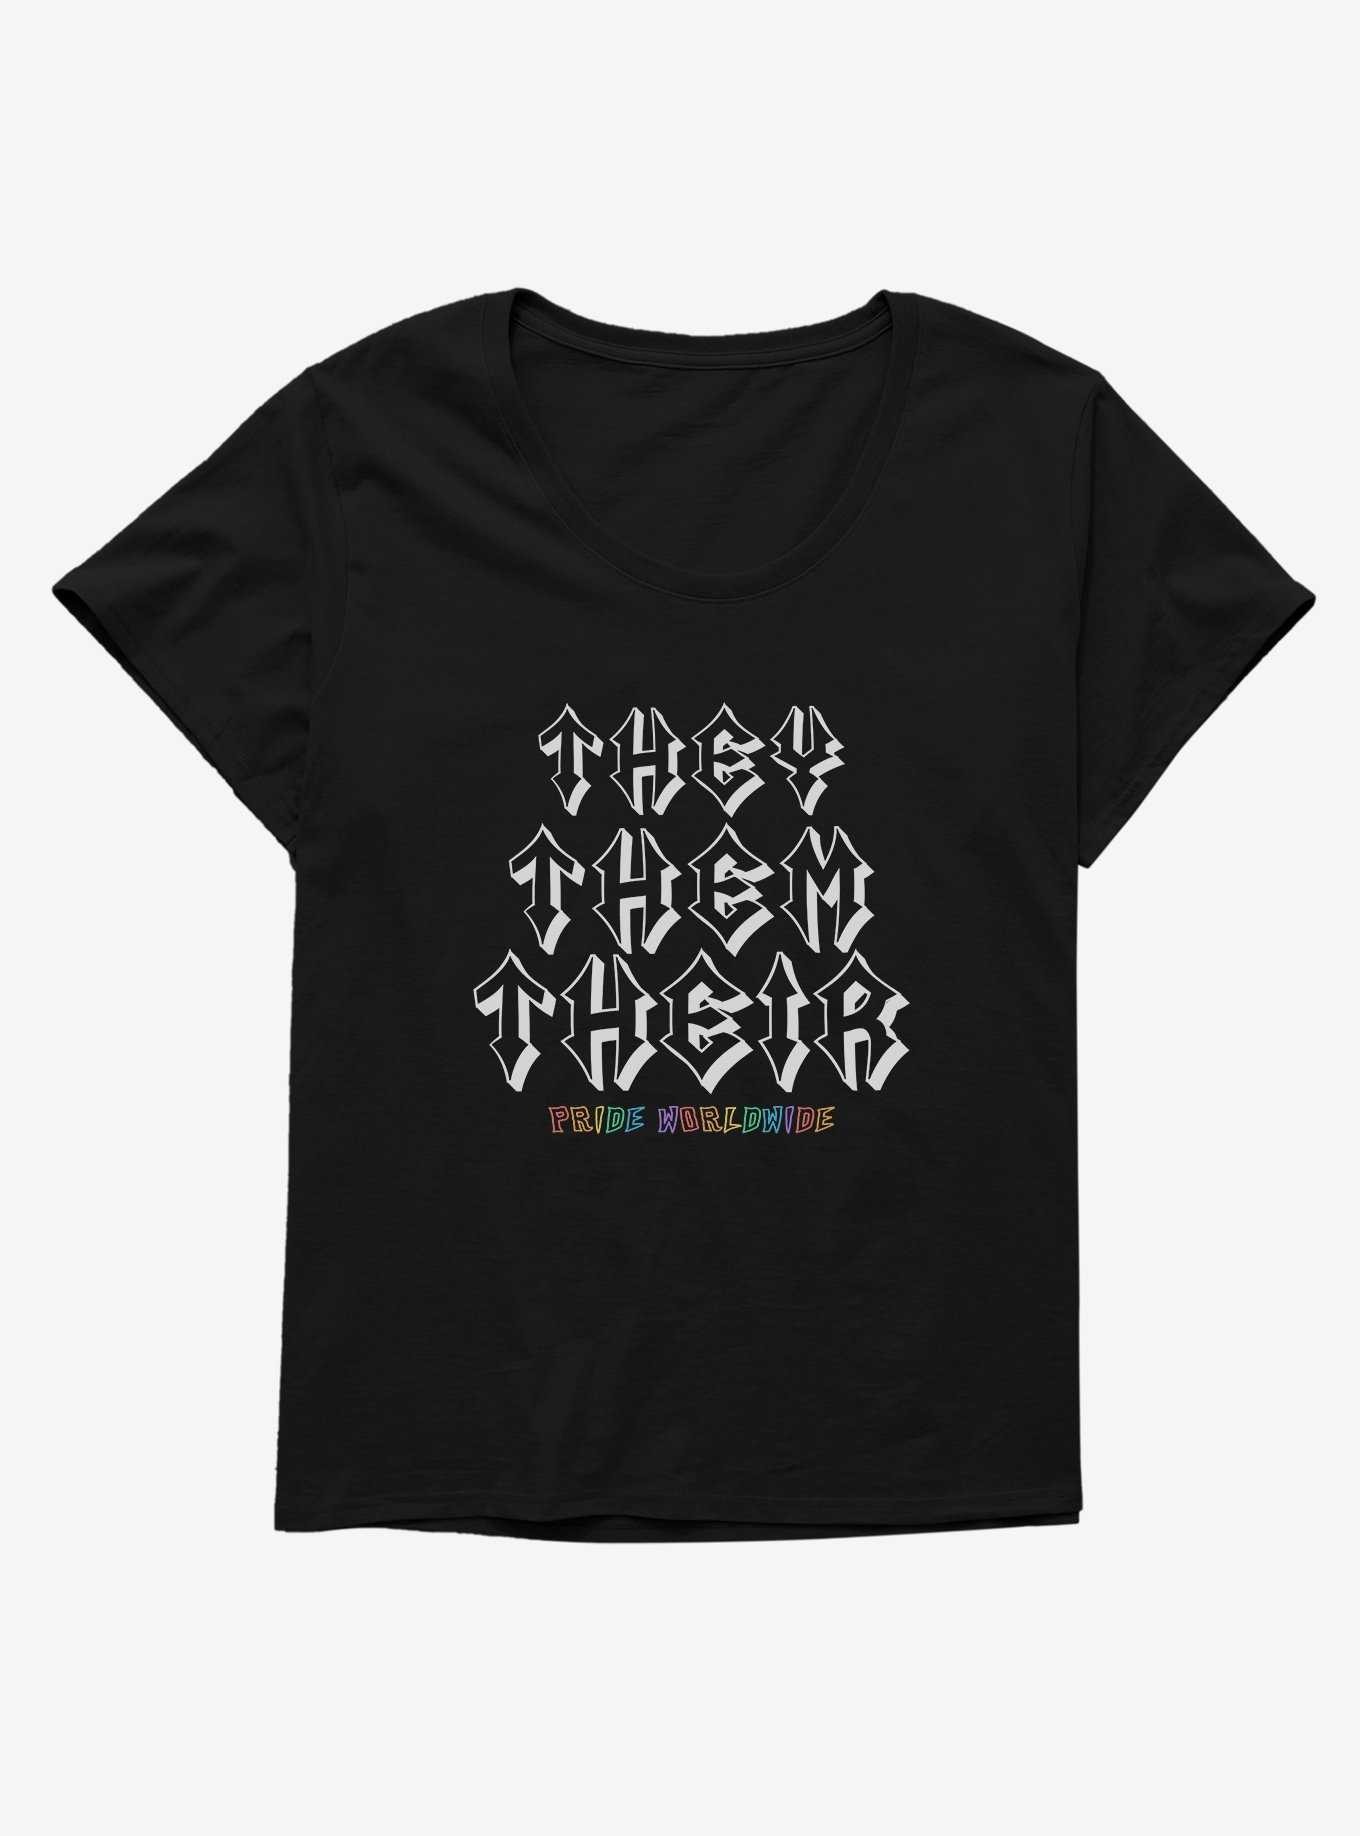 Pride They Pronouns Worldwide Girls T-Shirt Plus Size, , hi-res